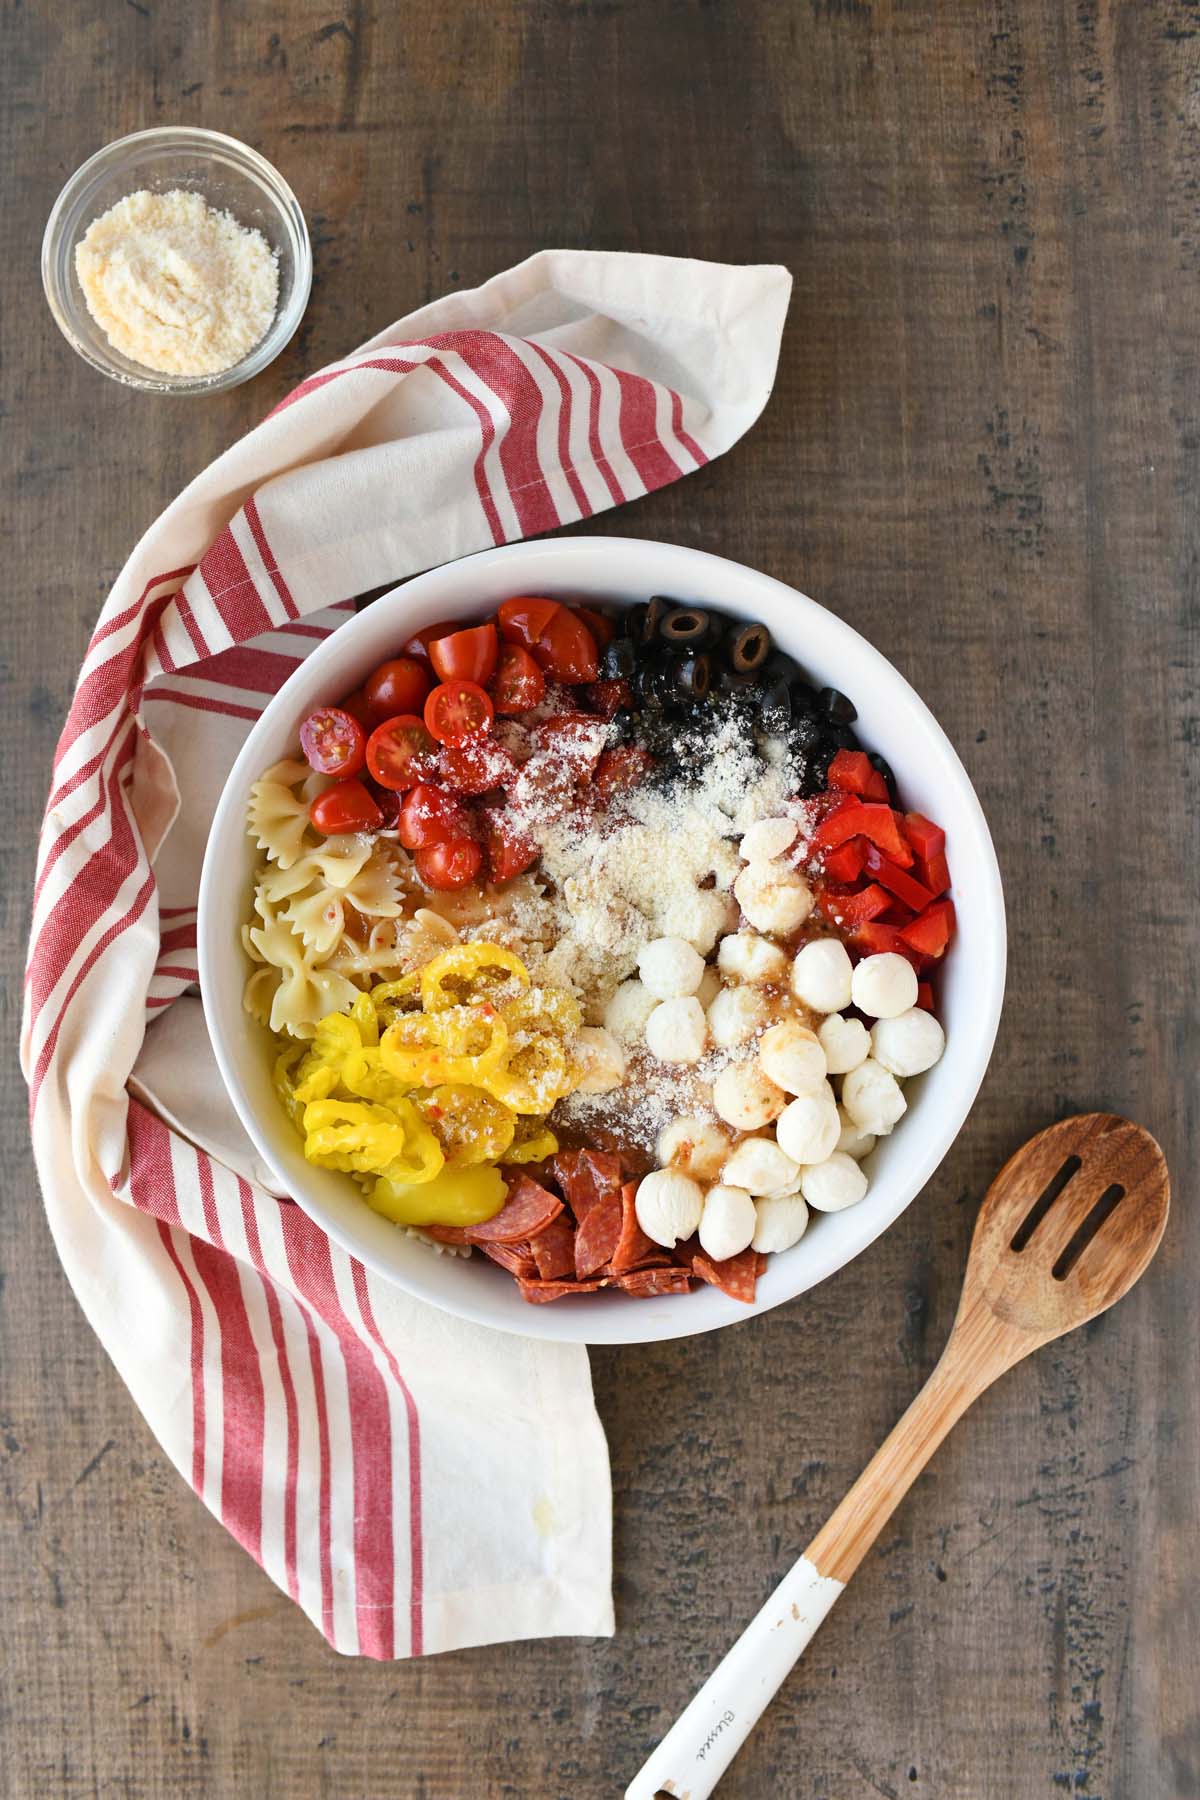 Unmixed pizza pasta salad in a white bowl near a red striped napkin. 